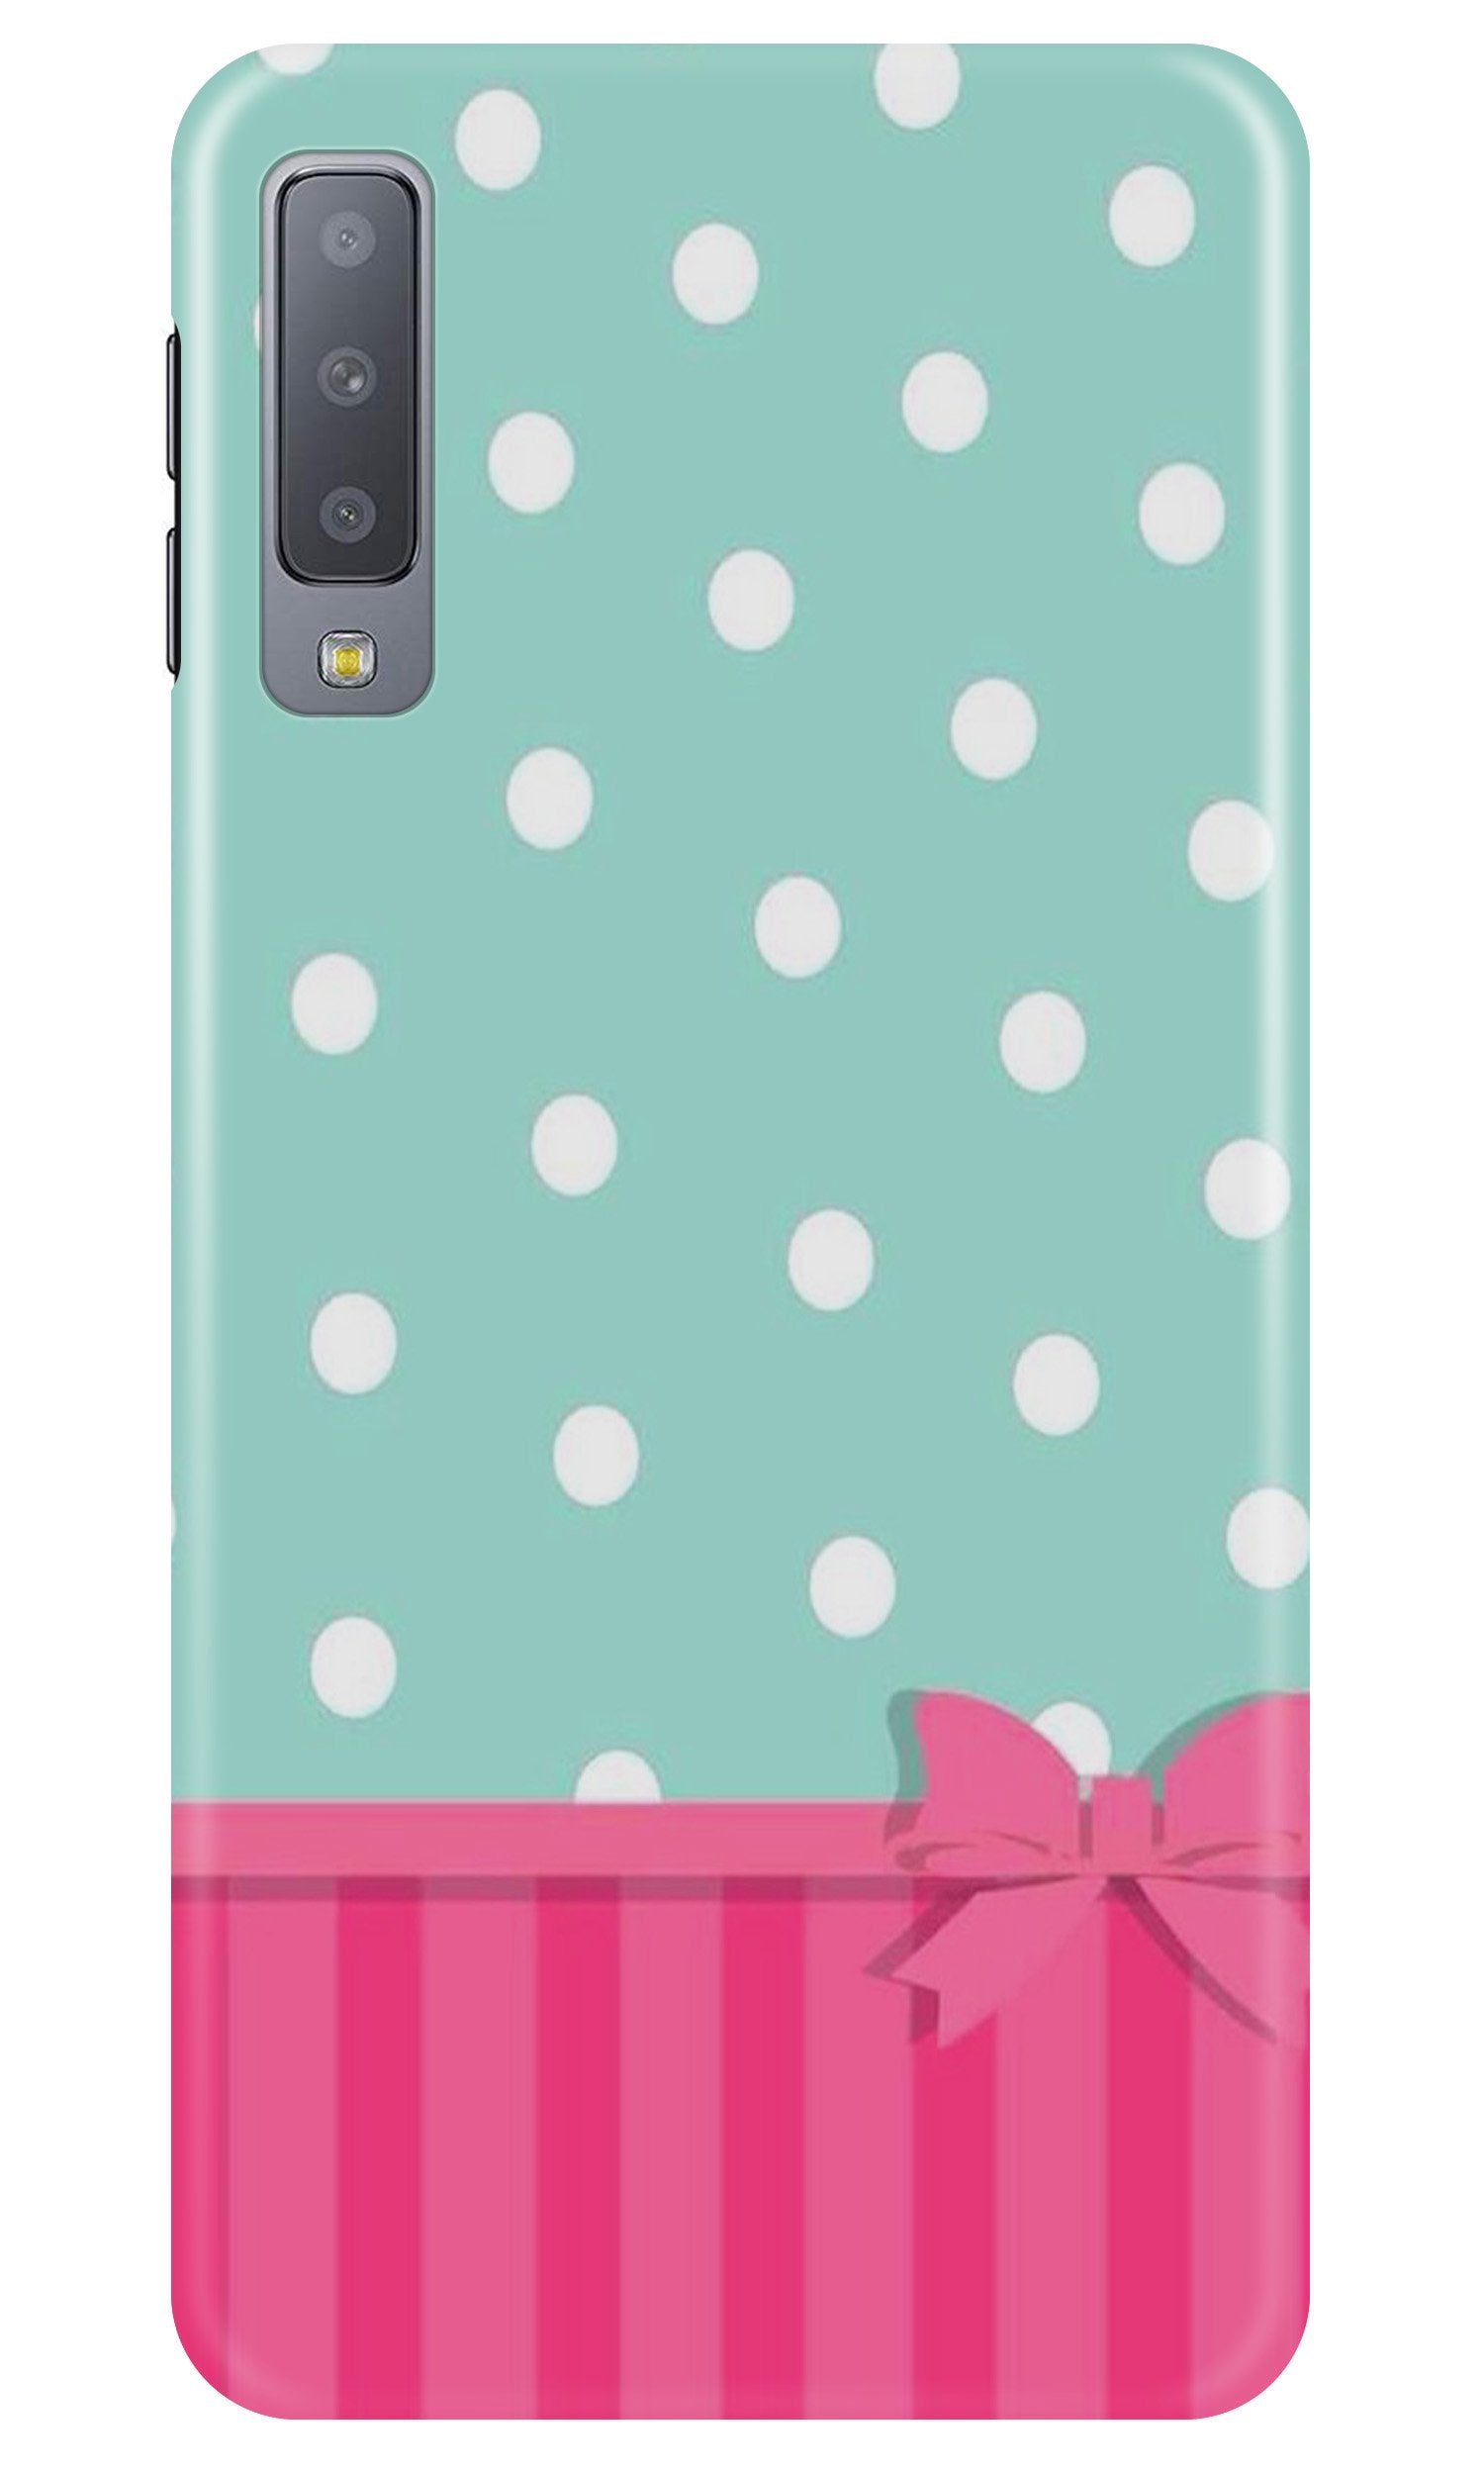 Gift Wrap Case for Galaxy A7 (2018)